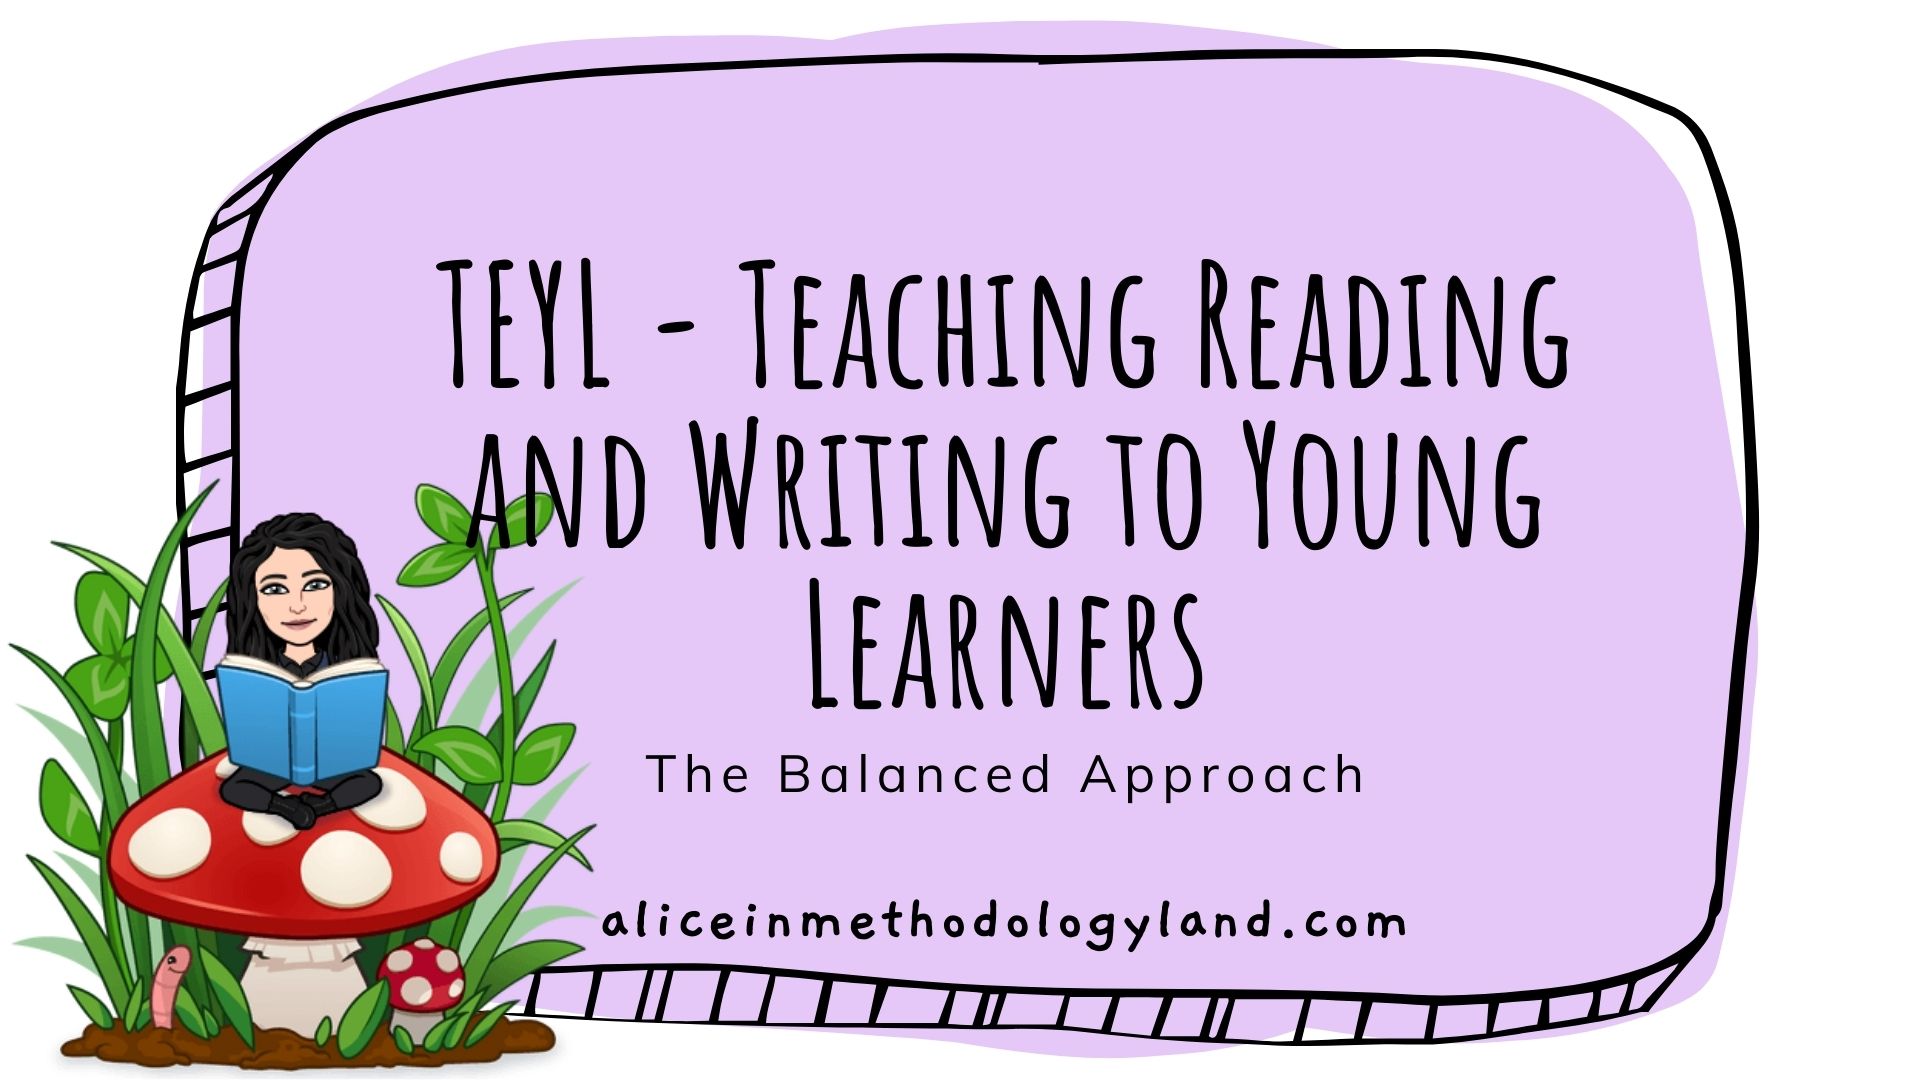 Teyl Teaching Reading And Writing To Young Learners Teaching reading for young learners ppt